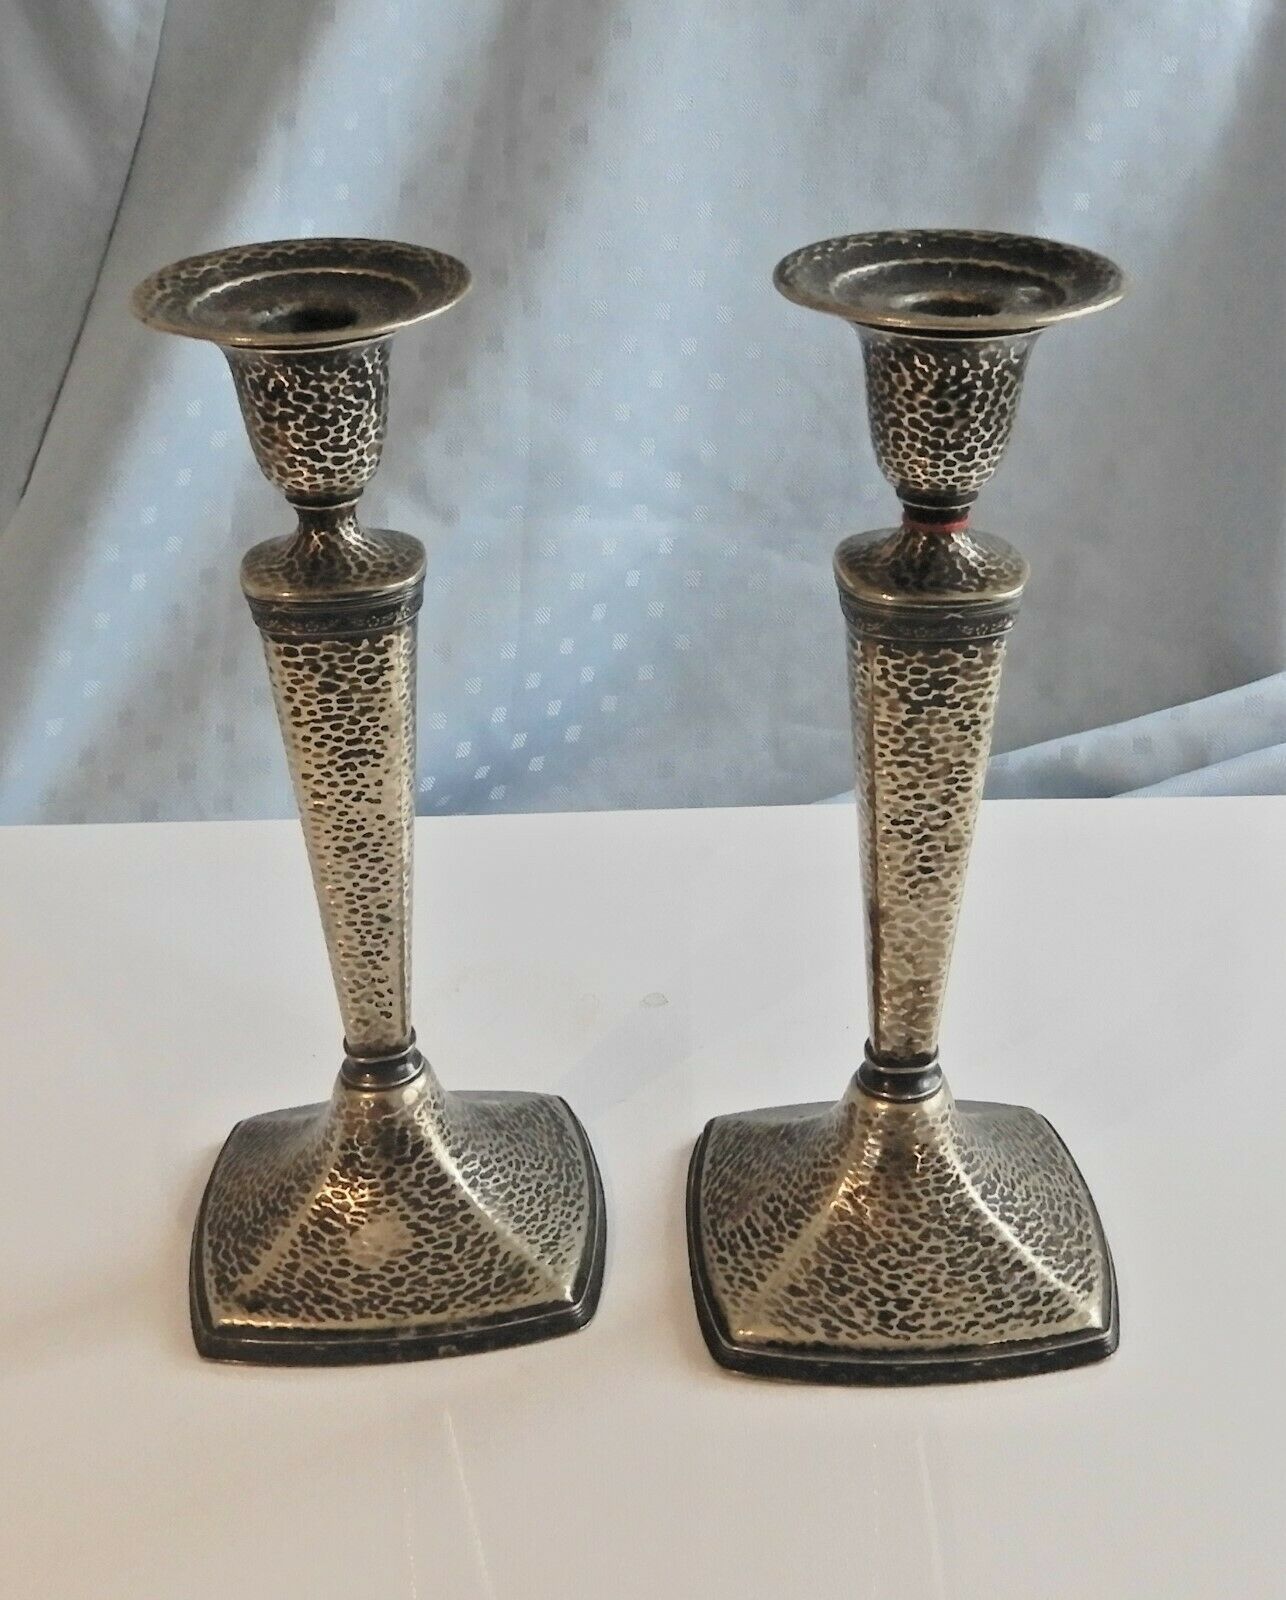 Pair Of Candle Sticks, Homan Plate Nickel Silver, Usa